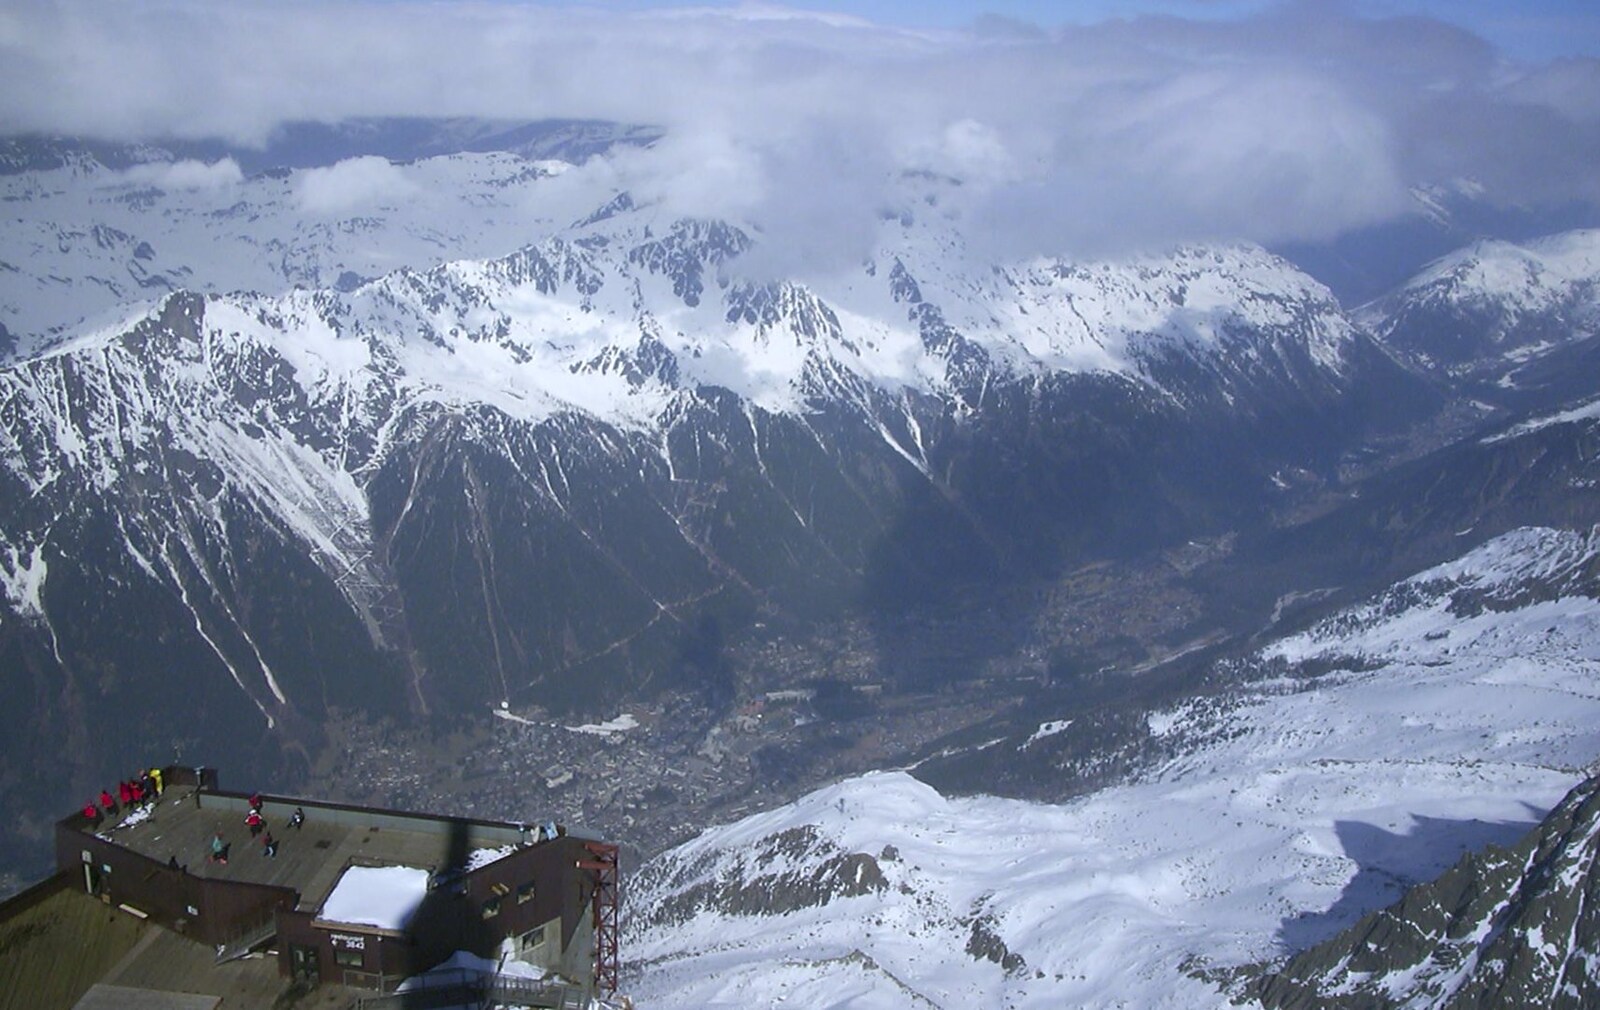 Looking down on Chamonix from the mountain top from 3G Lab Goes Skiing In Chamonix, France - 12th March 2002